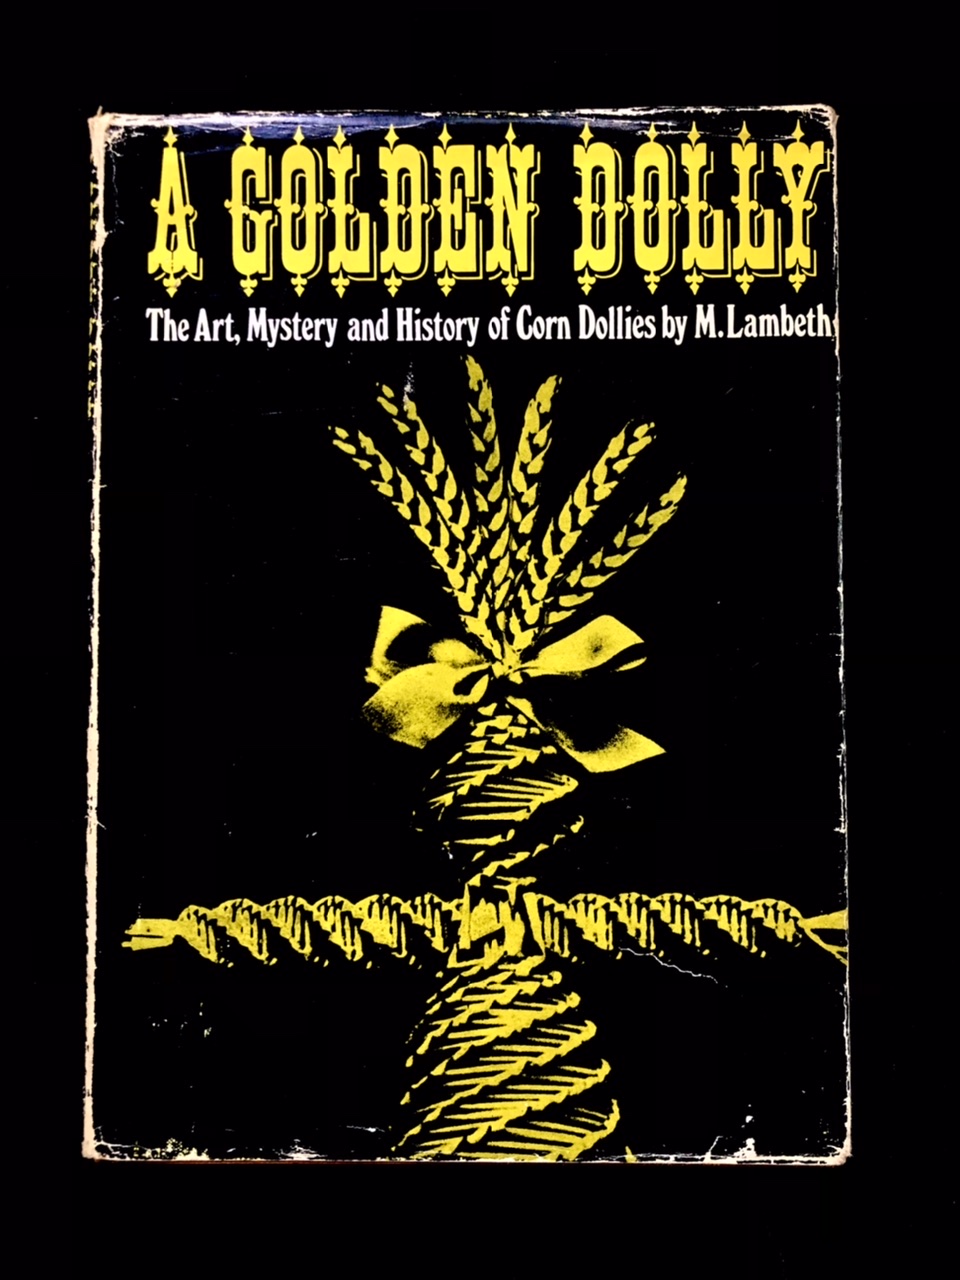 A Golden Dolly: The Art, Mystery and History of Corn Dollies by M. Lambeth